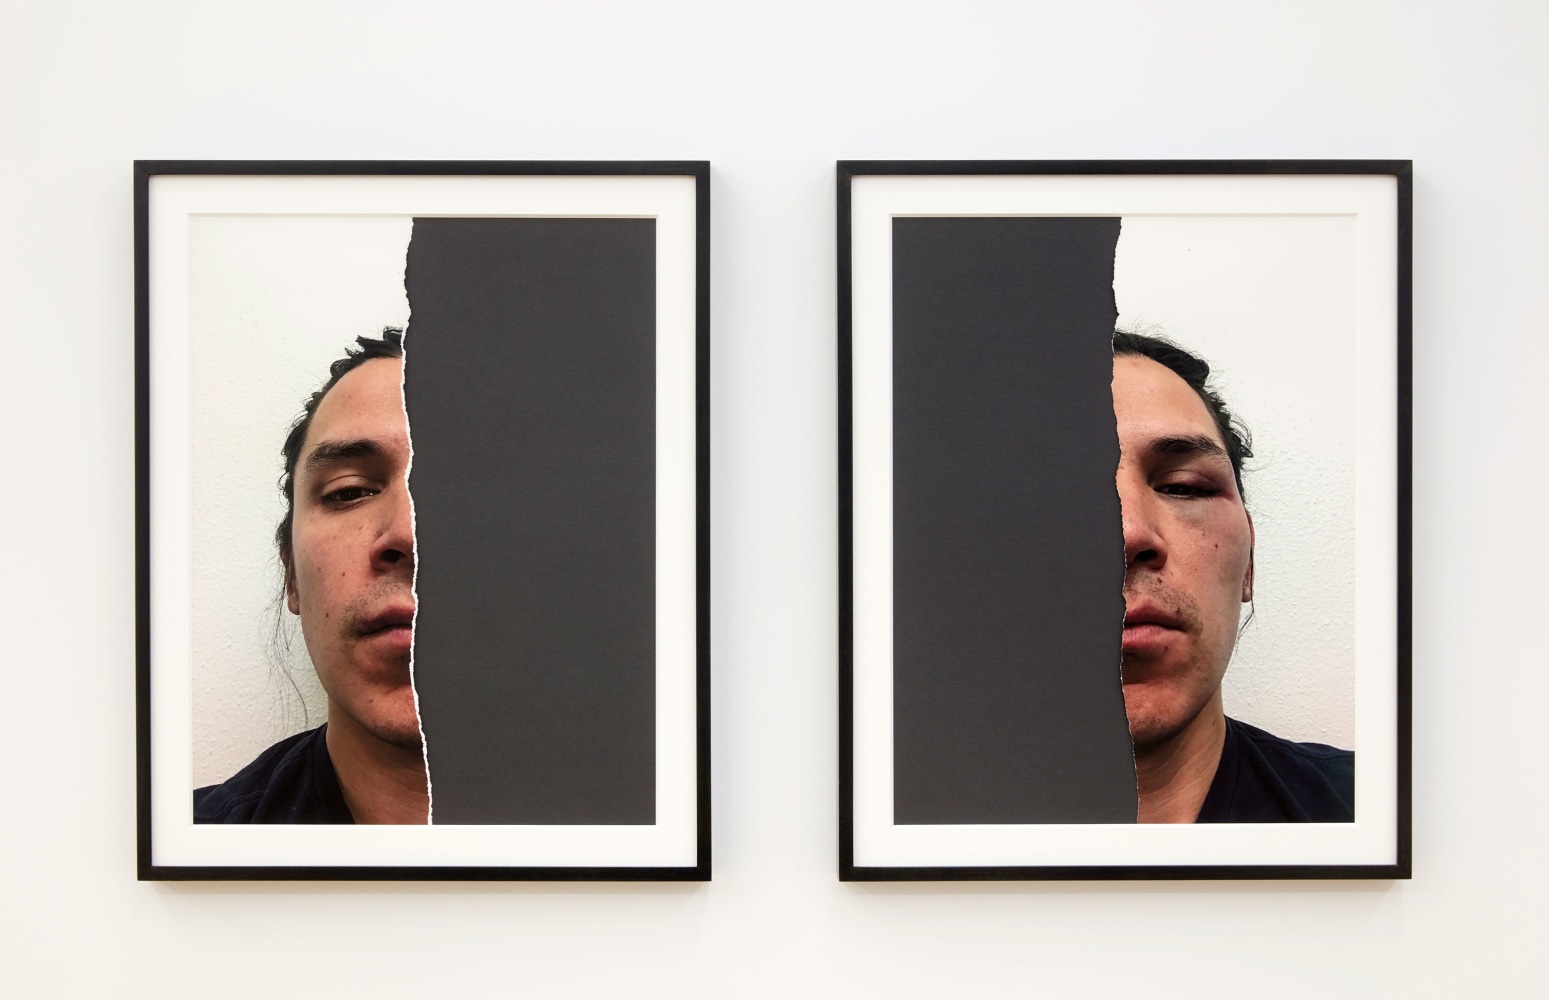 
Nicholas Galanin
The violence of blood quantum, half human (animal), half human (animal) after James Luna, 2019
diptych, portrait of the artist; both halves of torn archival digital print
20 1/2 x 15 1/2 inches (52.1 x 39.4 cm), each
edition of 10
(NGA19-23)